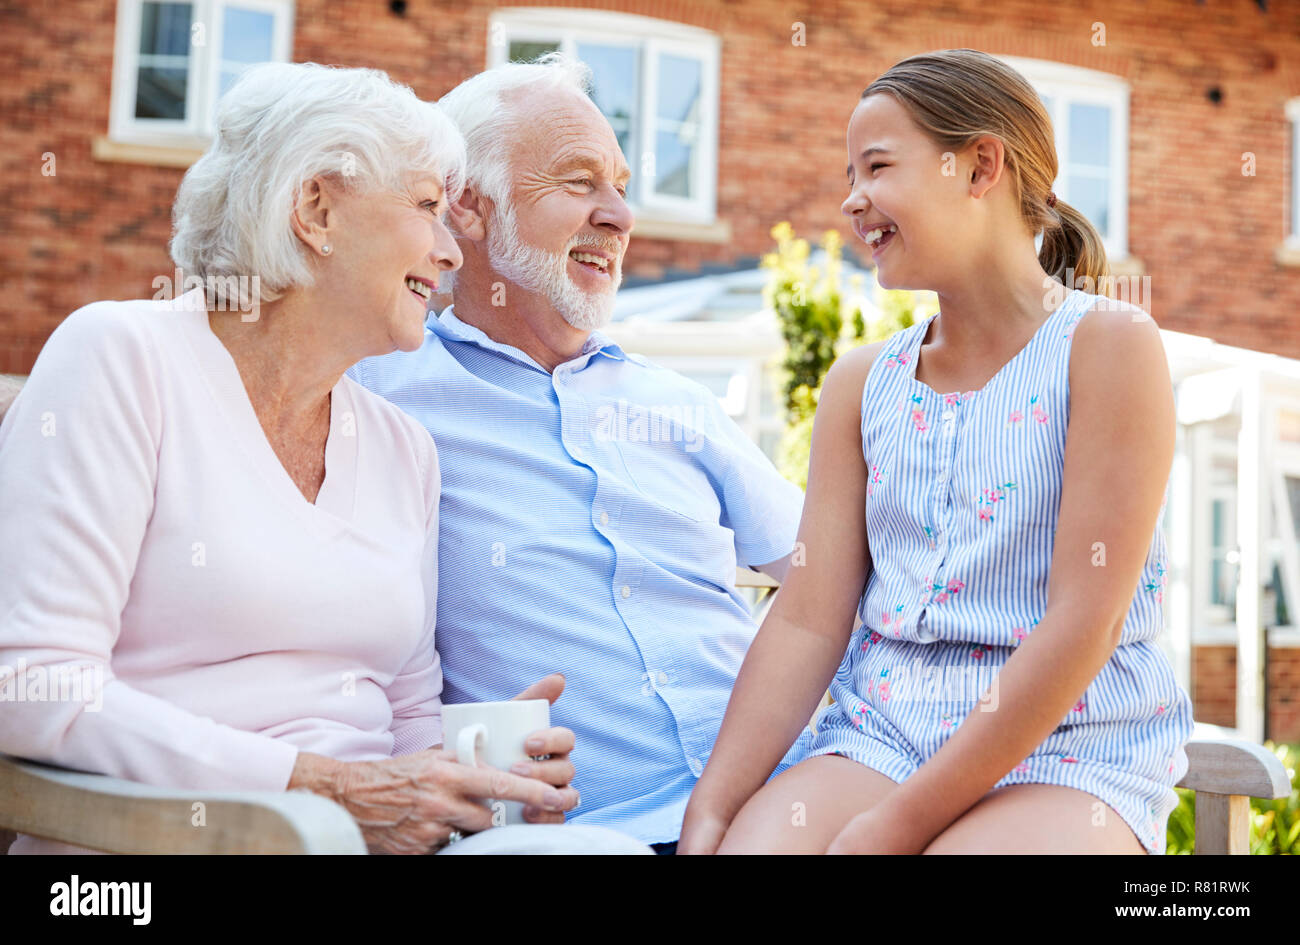 Granddaughter Talking With Grandparents During Visit To Retirement Home Stock Photo